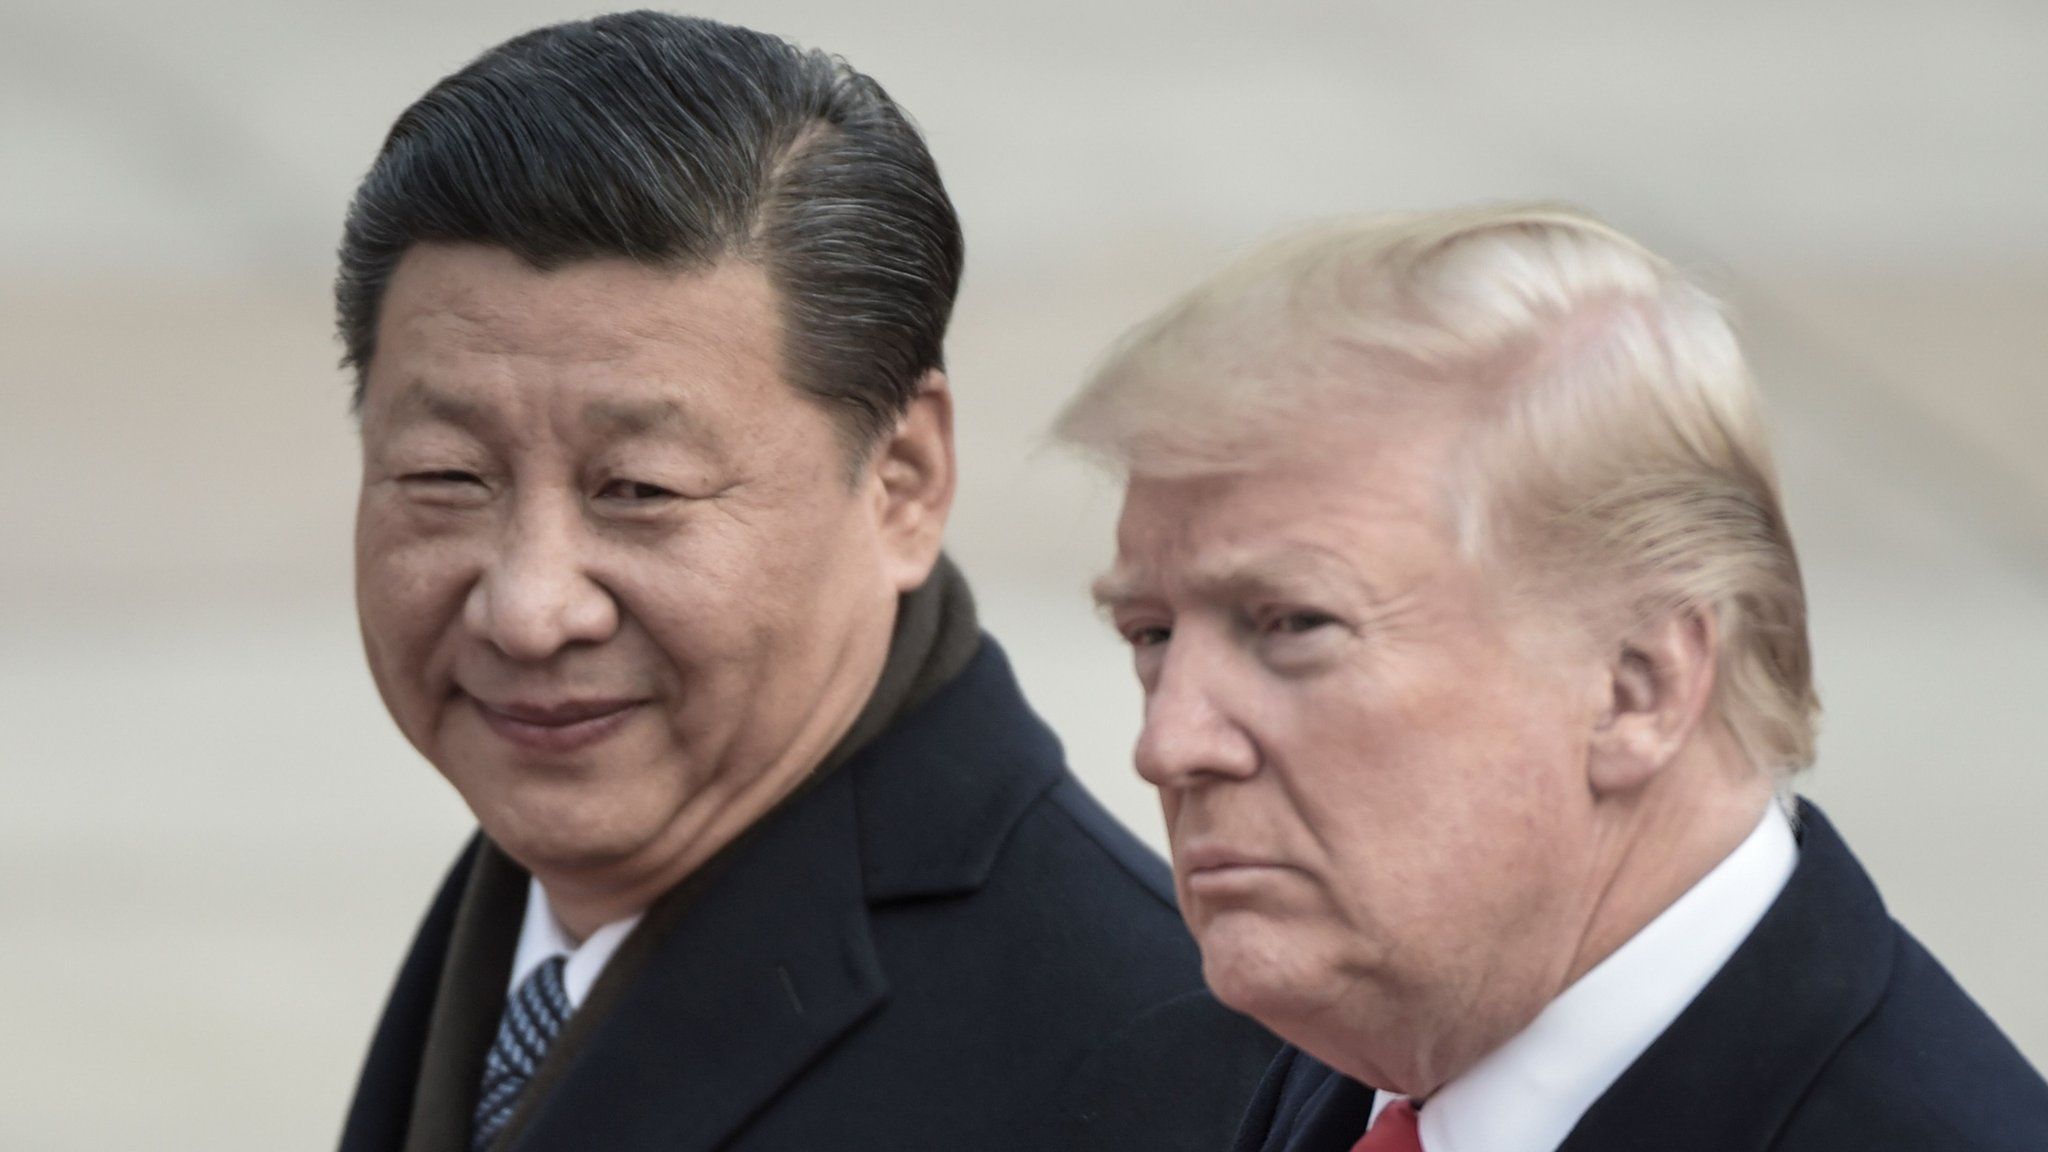 China's President Xi Jinping and US President Donald Trump in Beijing on November 9, 2017.